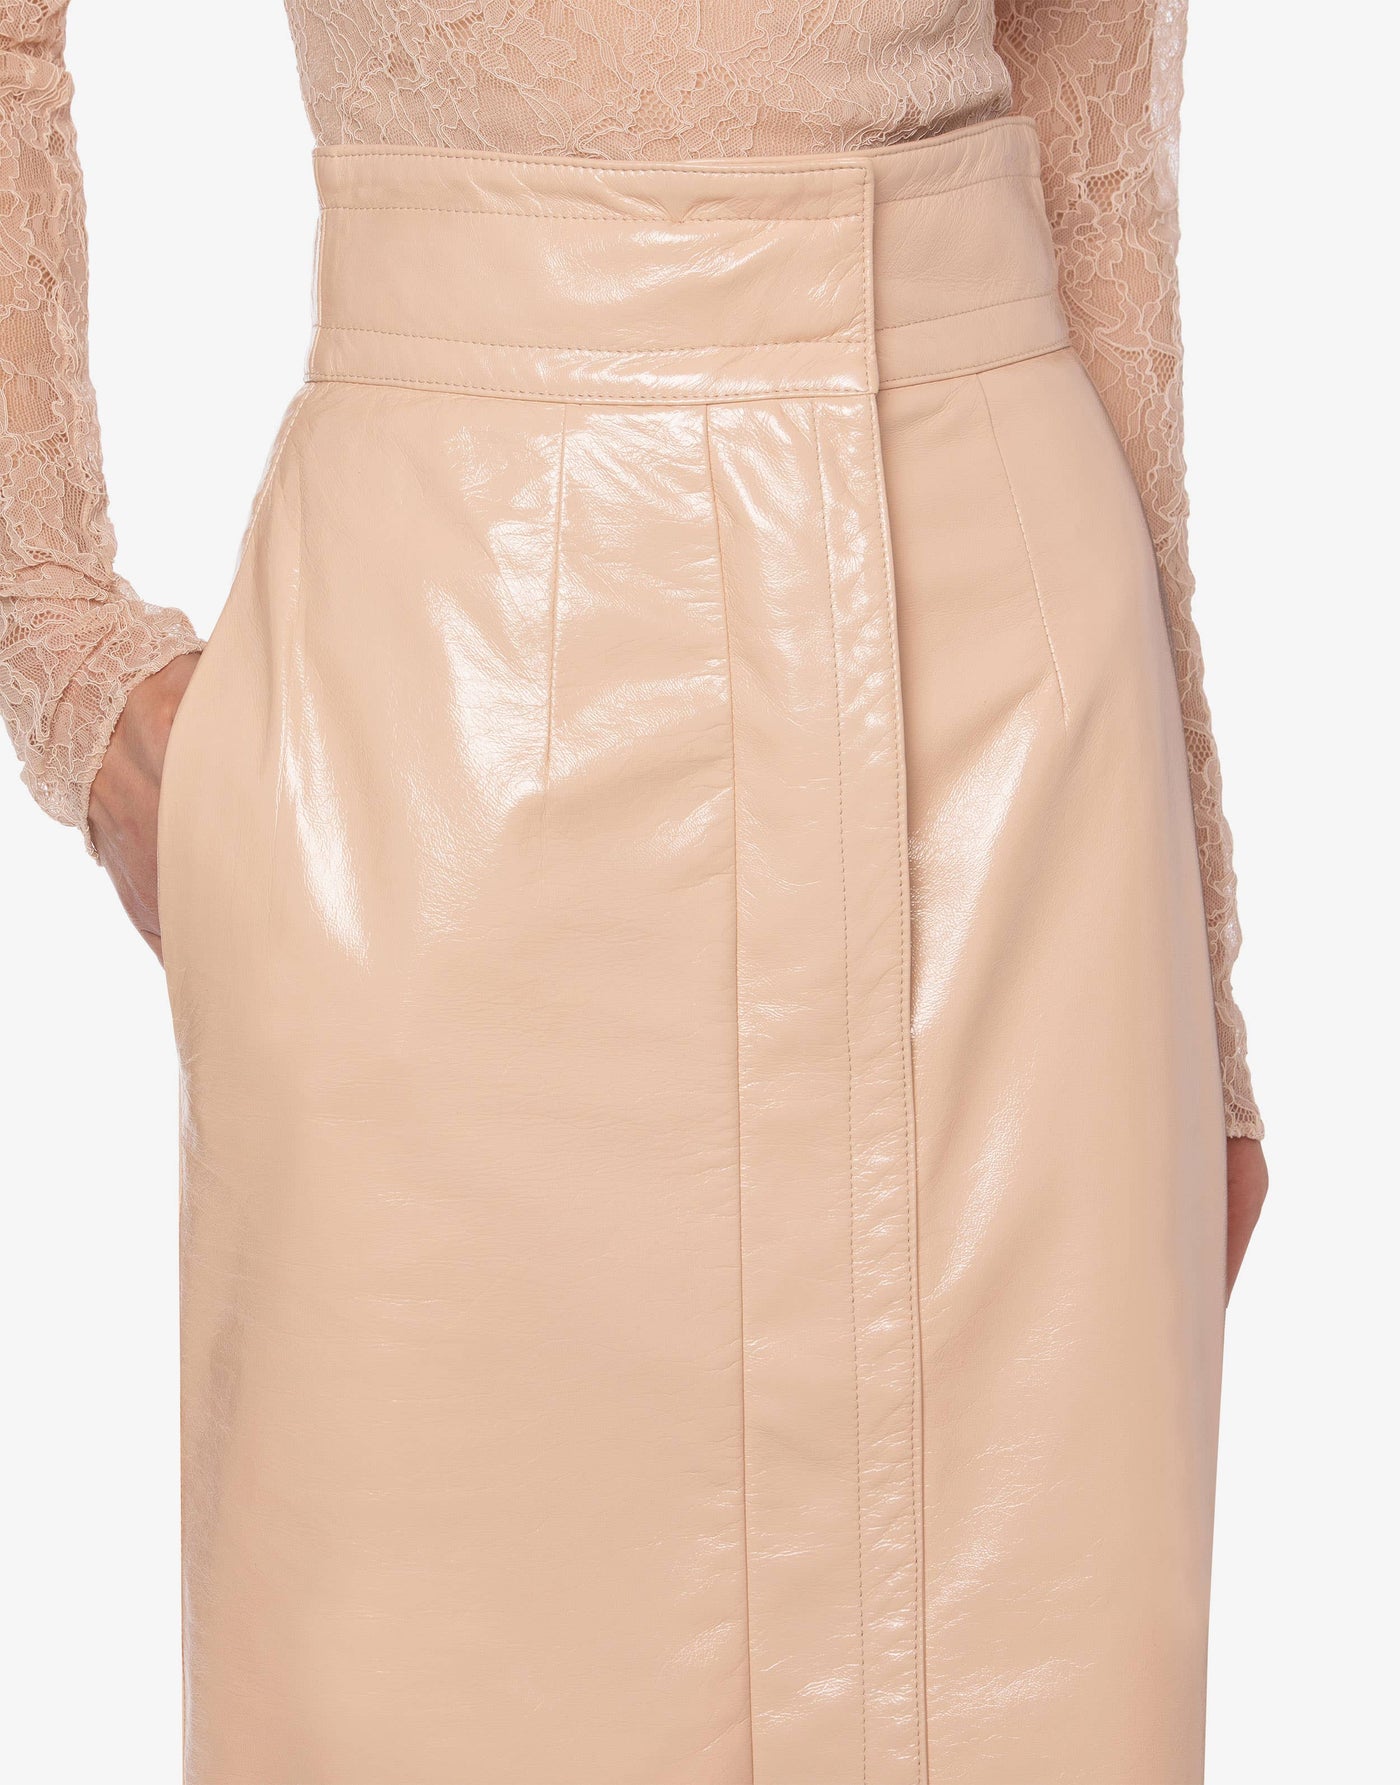 Skirt in glossy laminated leather